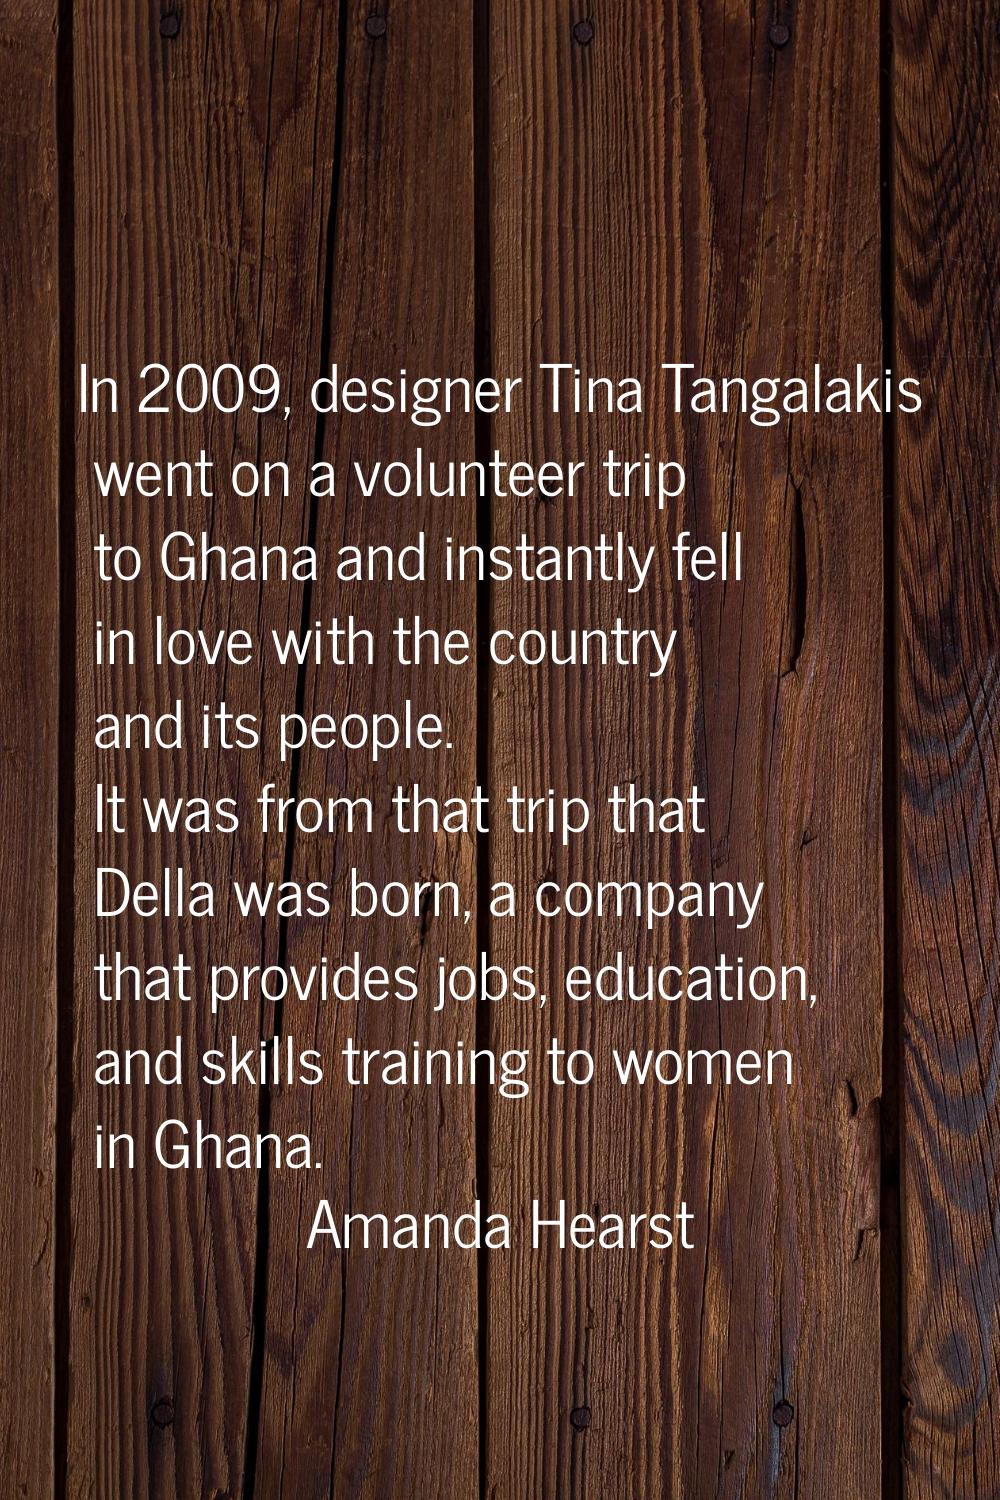 In 2009, designer Tina Tangalakis went on a volunteer trip to Ghana and instantly fell in love with